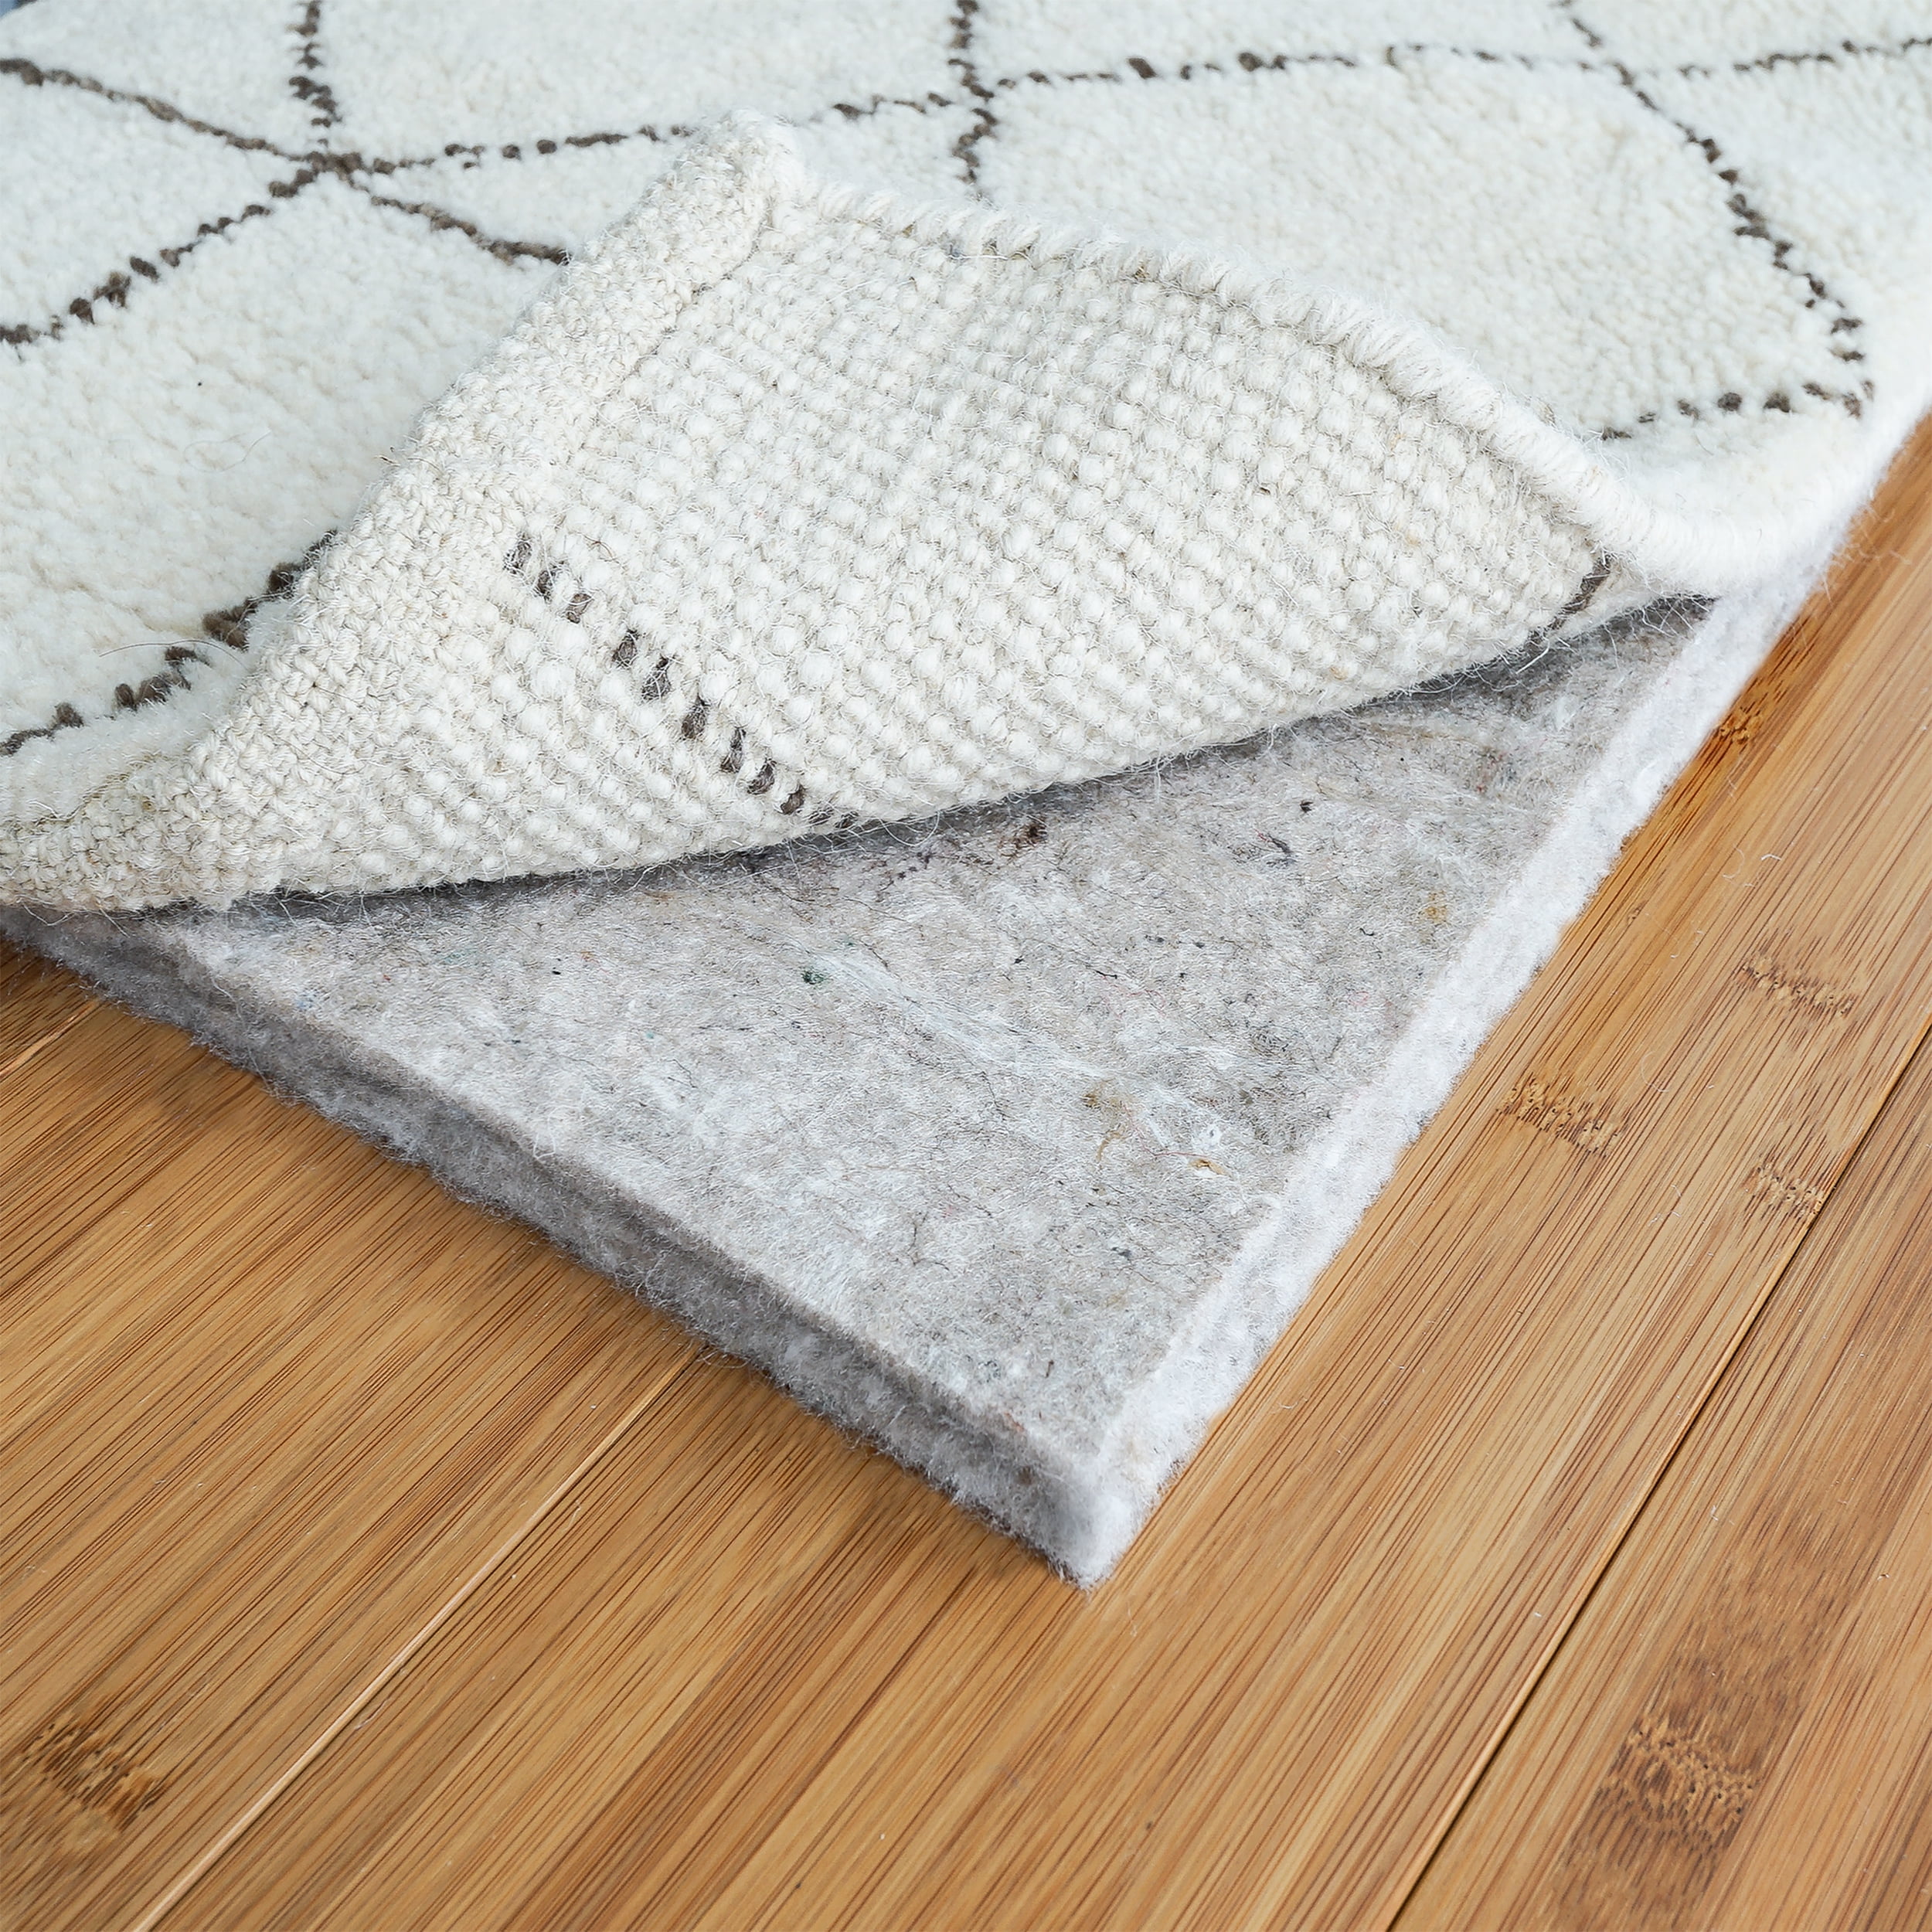 Available in Multiple Thicknesses RUGPADUSA 1//2 Thick 9x12 Safe for all Floors and Finishes Adds Cushion and Floor Protection Under Rugs Basics 100/% Felt Rug Pad